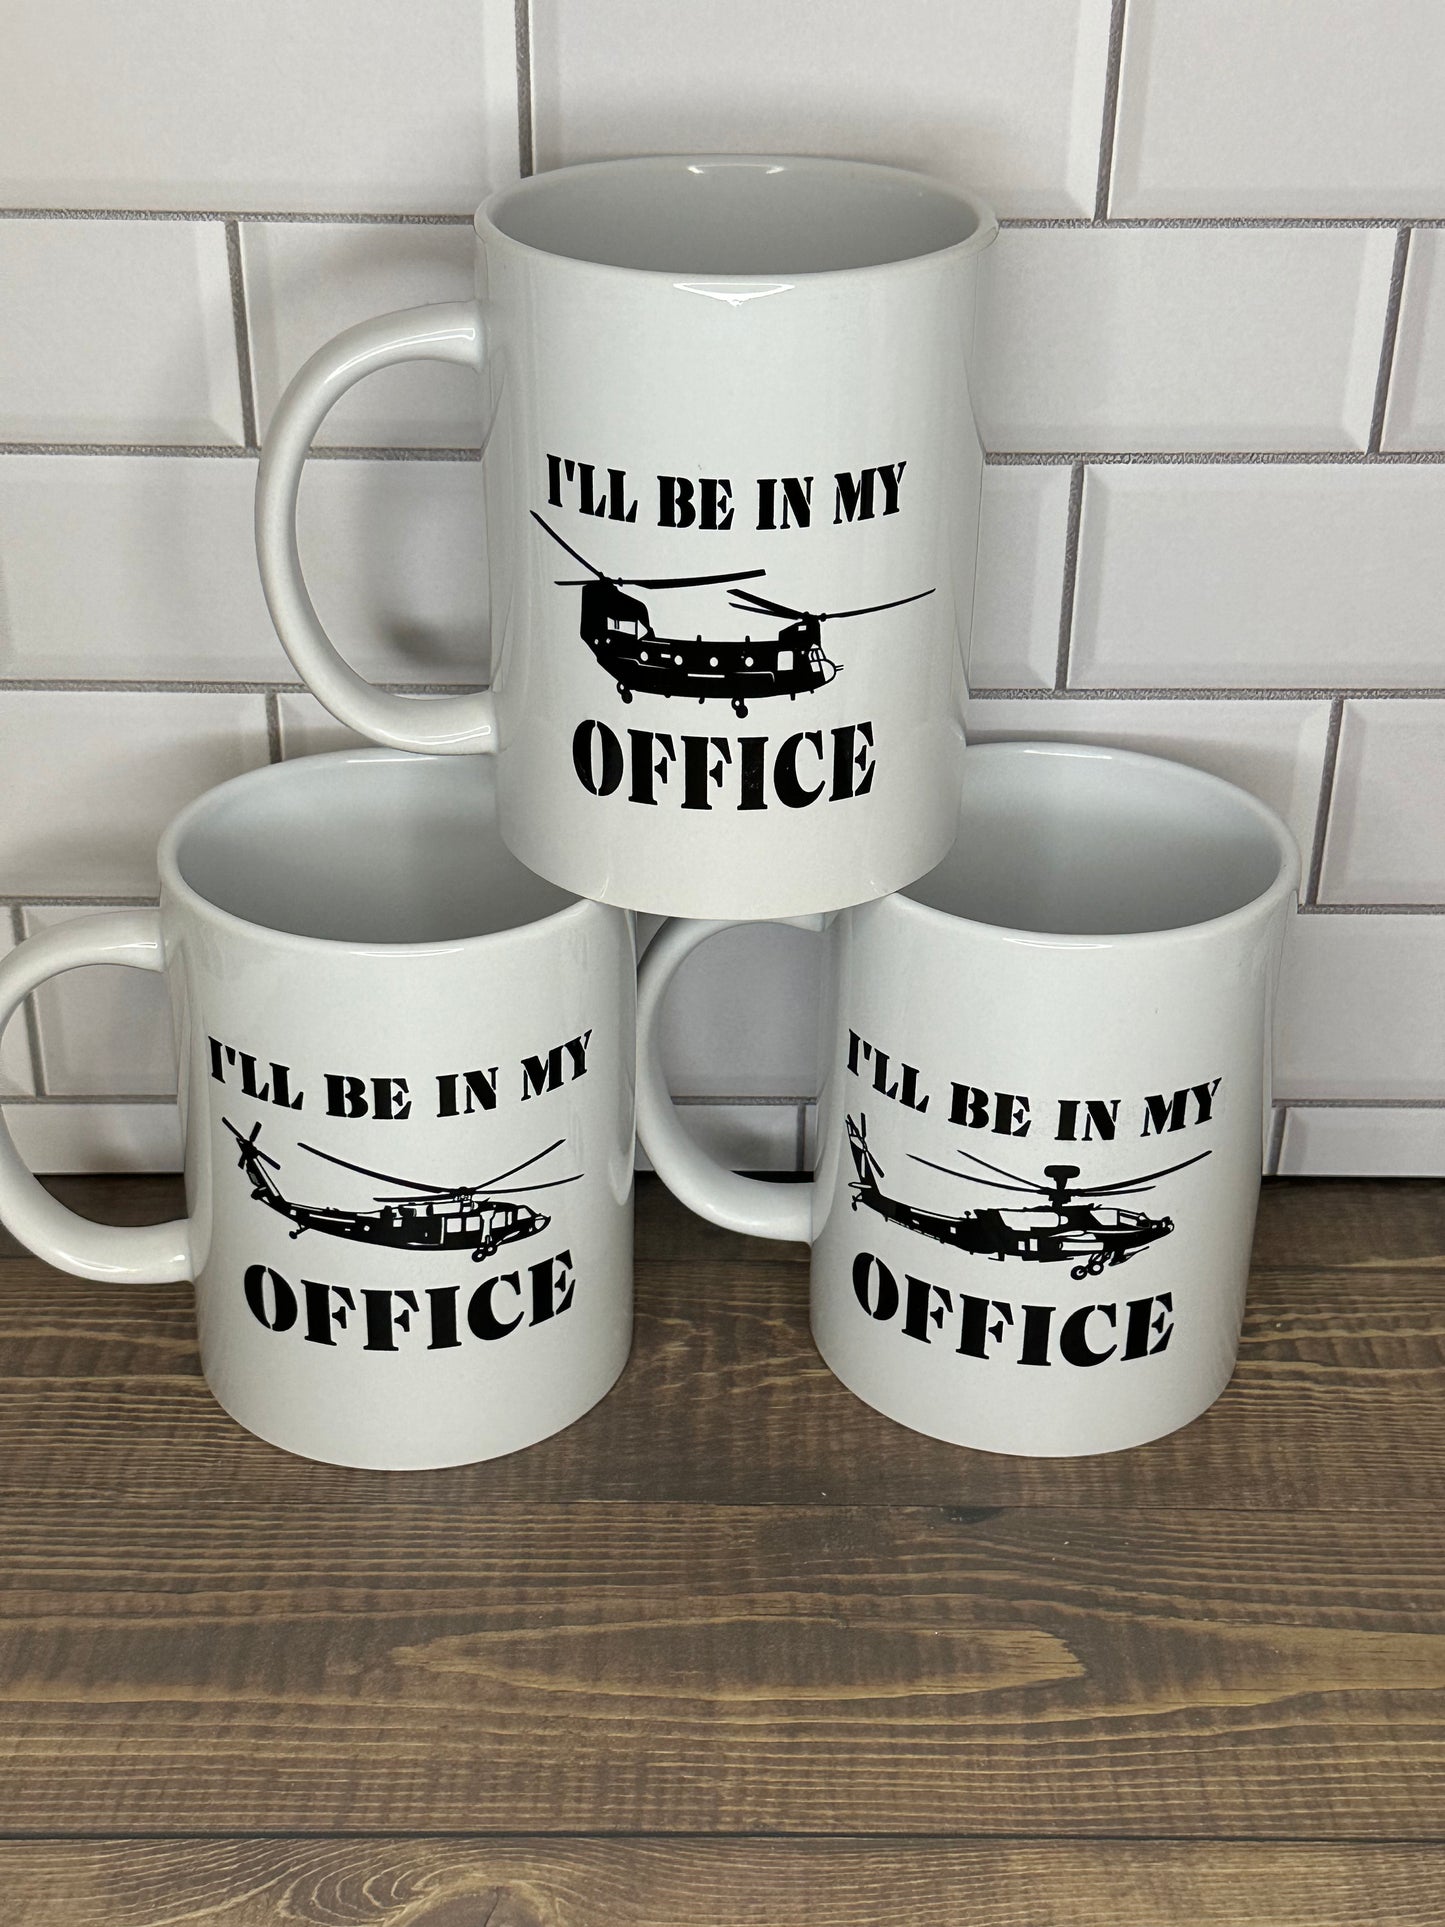 Coffee Mug "I’ll be in my office" UH-60 Blackhawk Helicopter